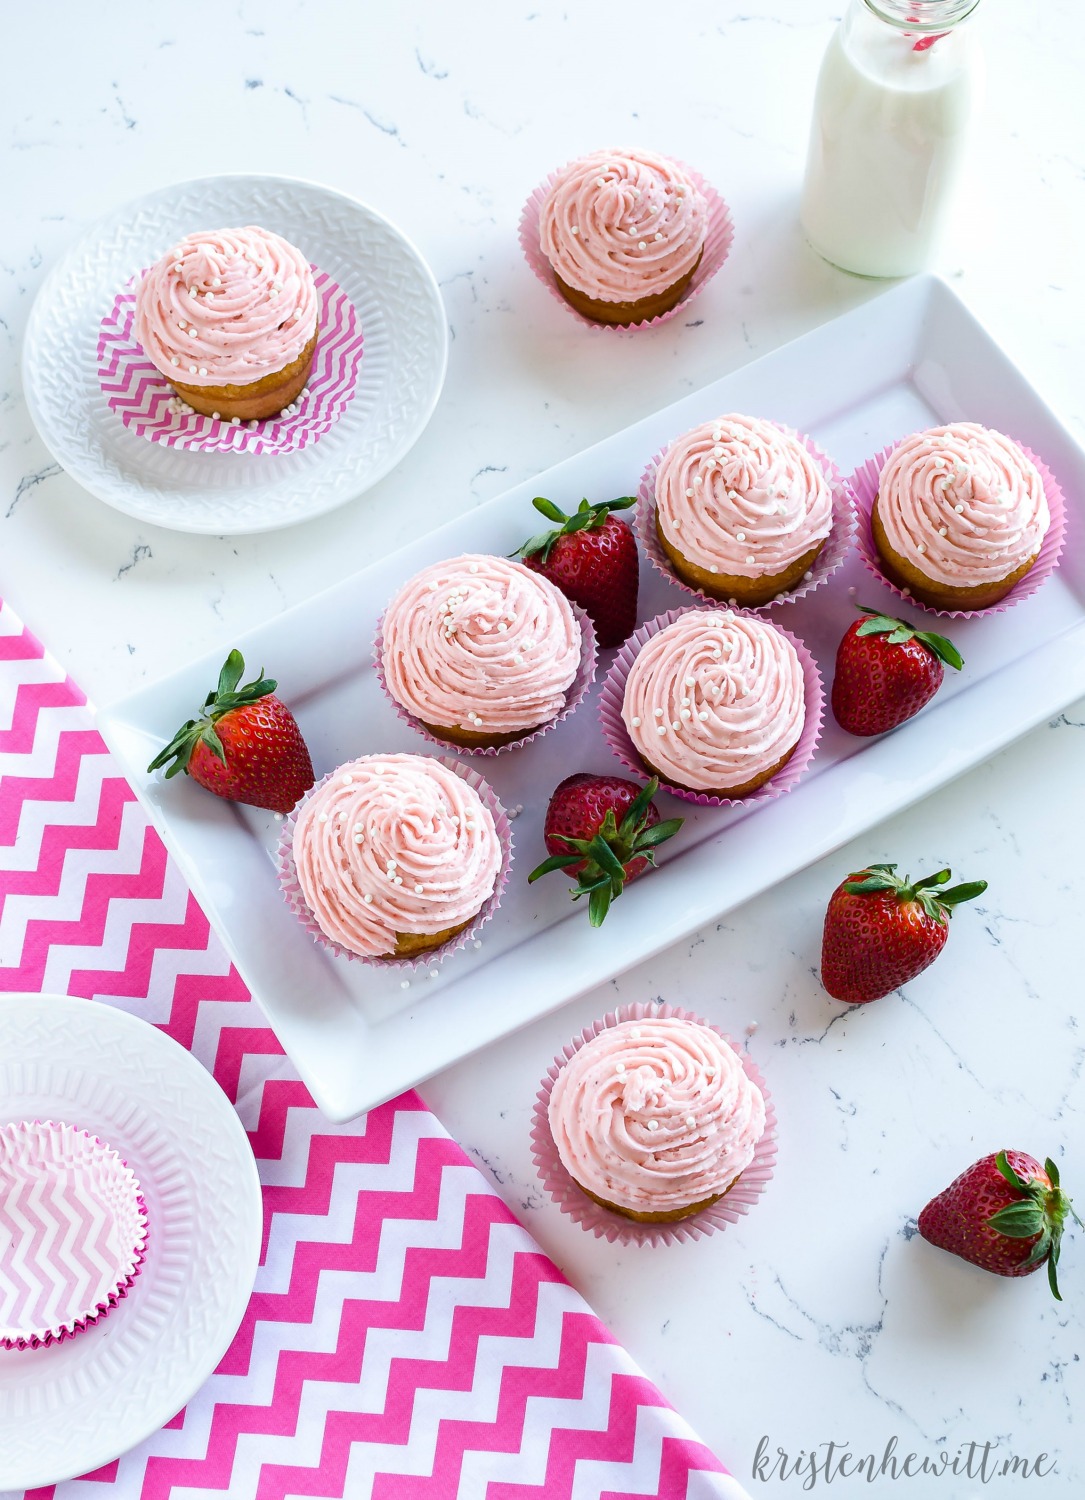 Looking for a decadent cupcake recipe using strawberries? Try this copycat recipe for Sprinkles Strawberry Cupcakes! The best cupcake you'll ever try!